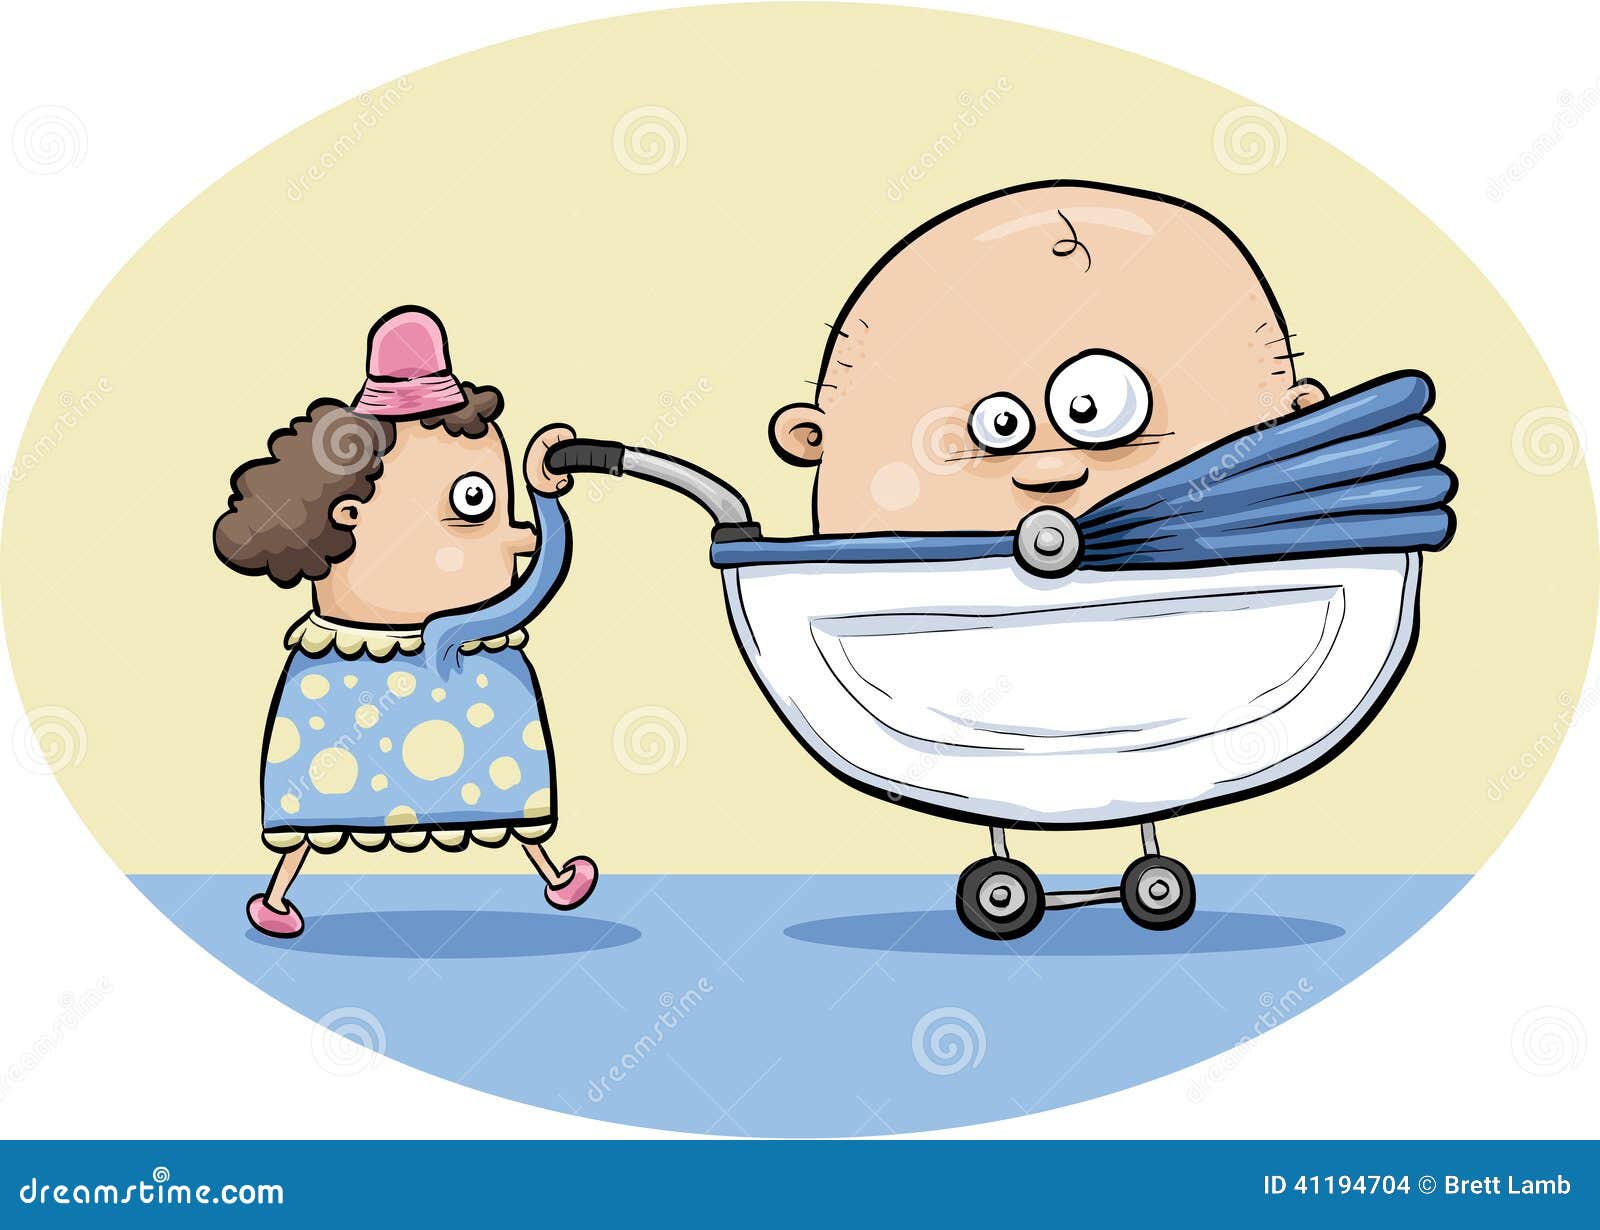 Woman with Big Baby stock illustration. Illustration of carriage - 41194704